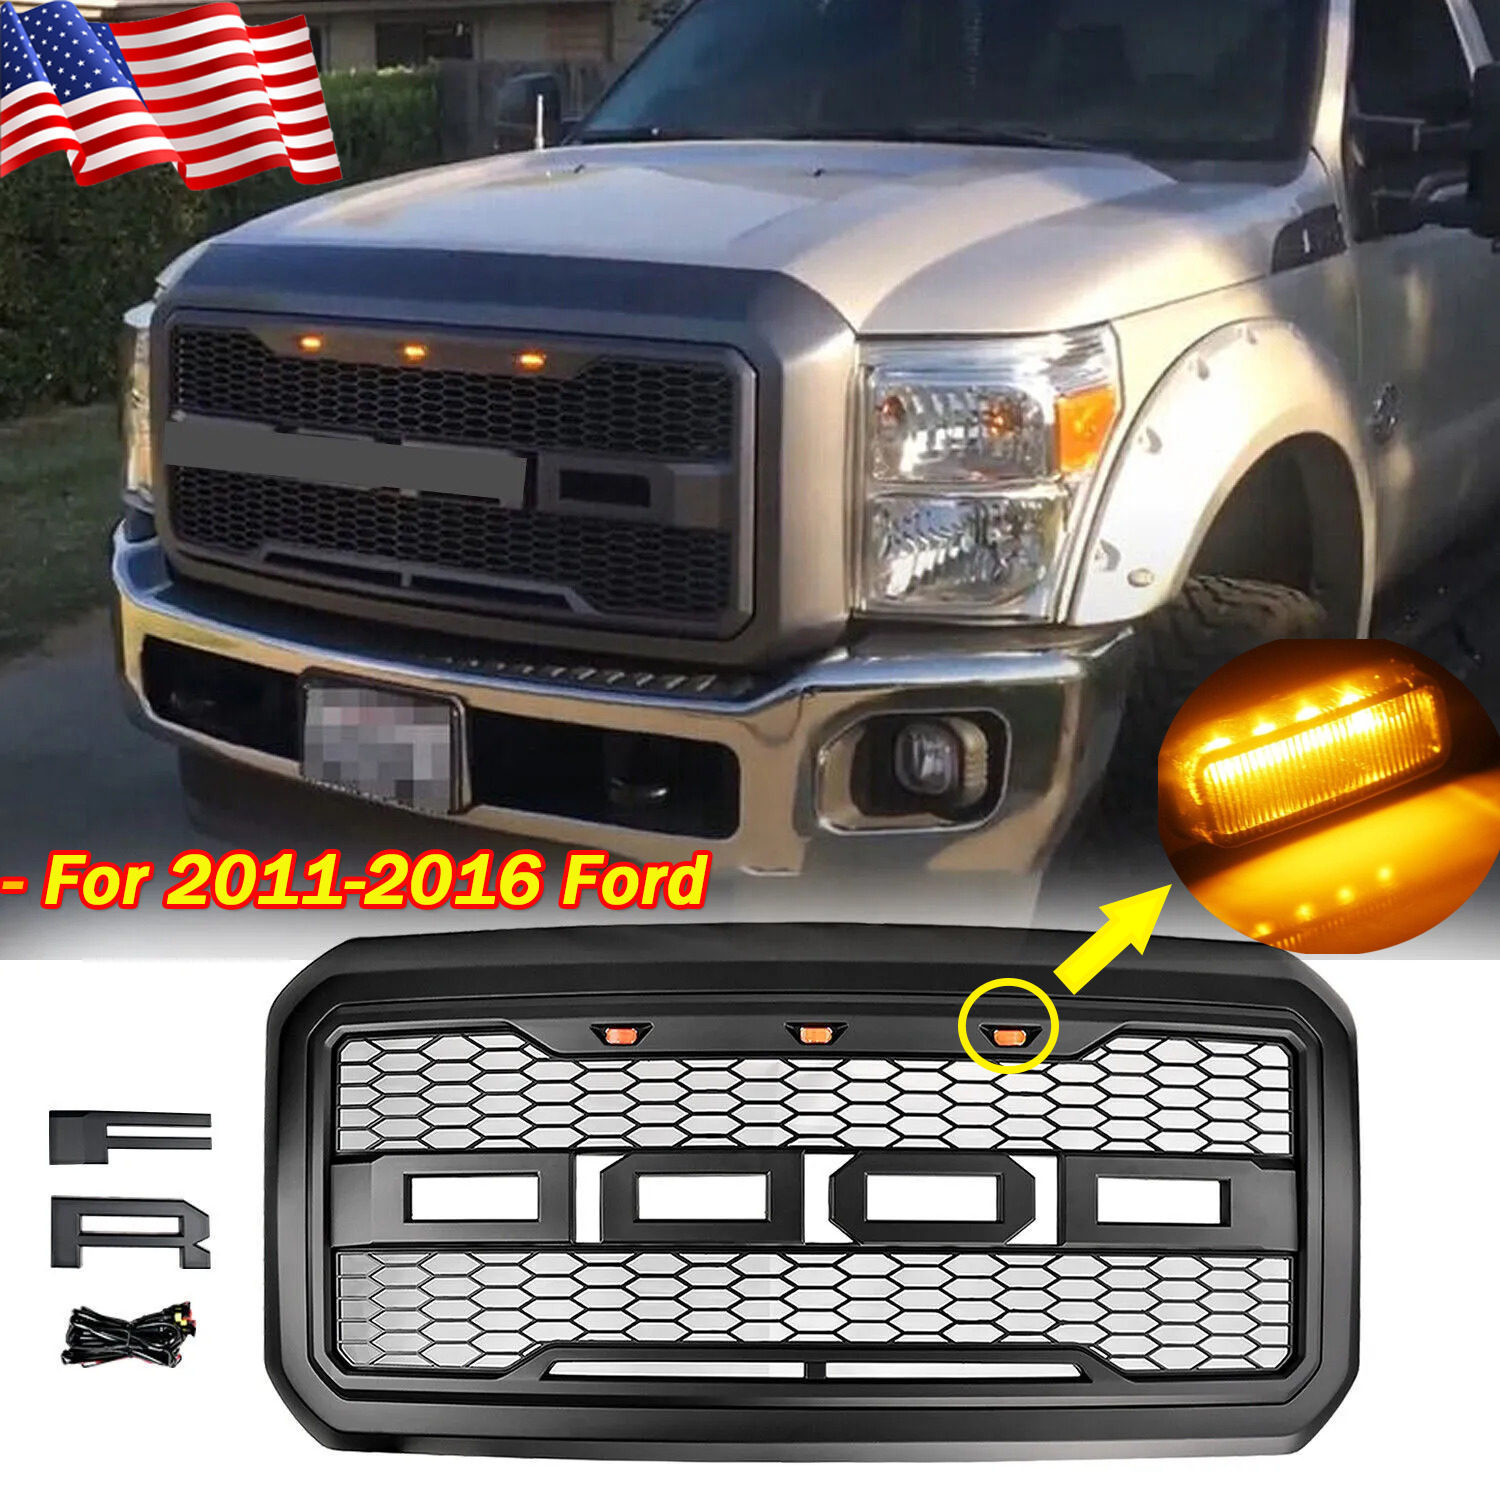 Front Grille For 2011-2016 Ford F250 F350 Super Duty w/Letters Matte Black Grill